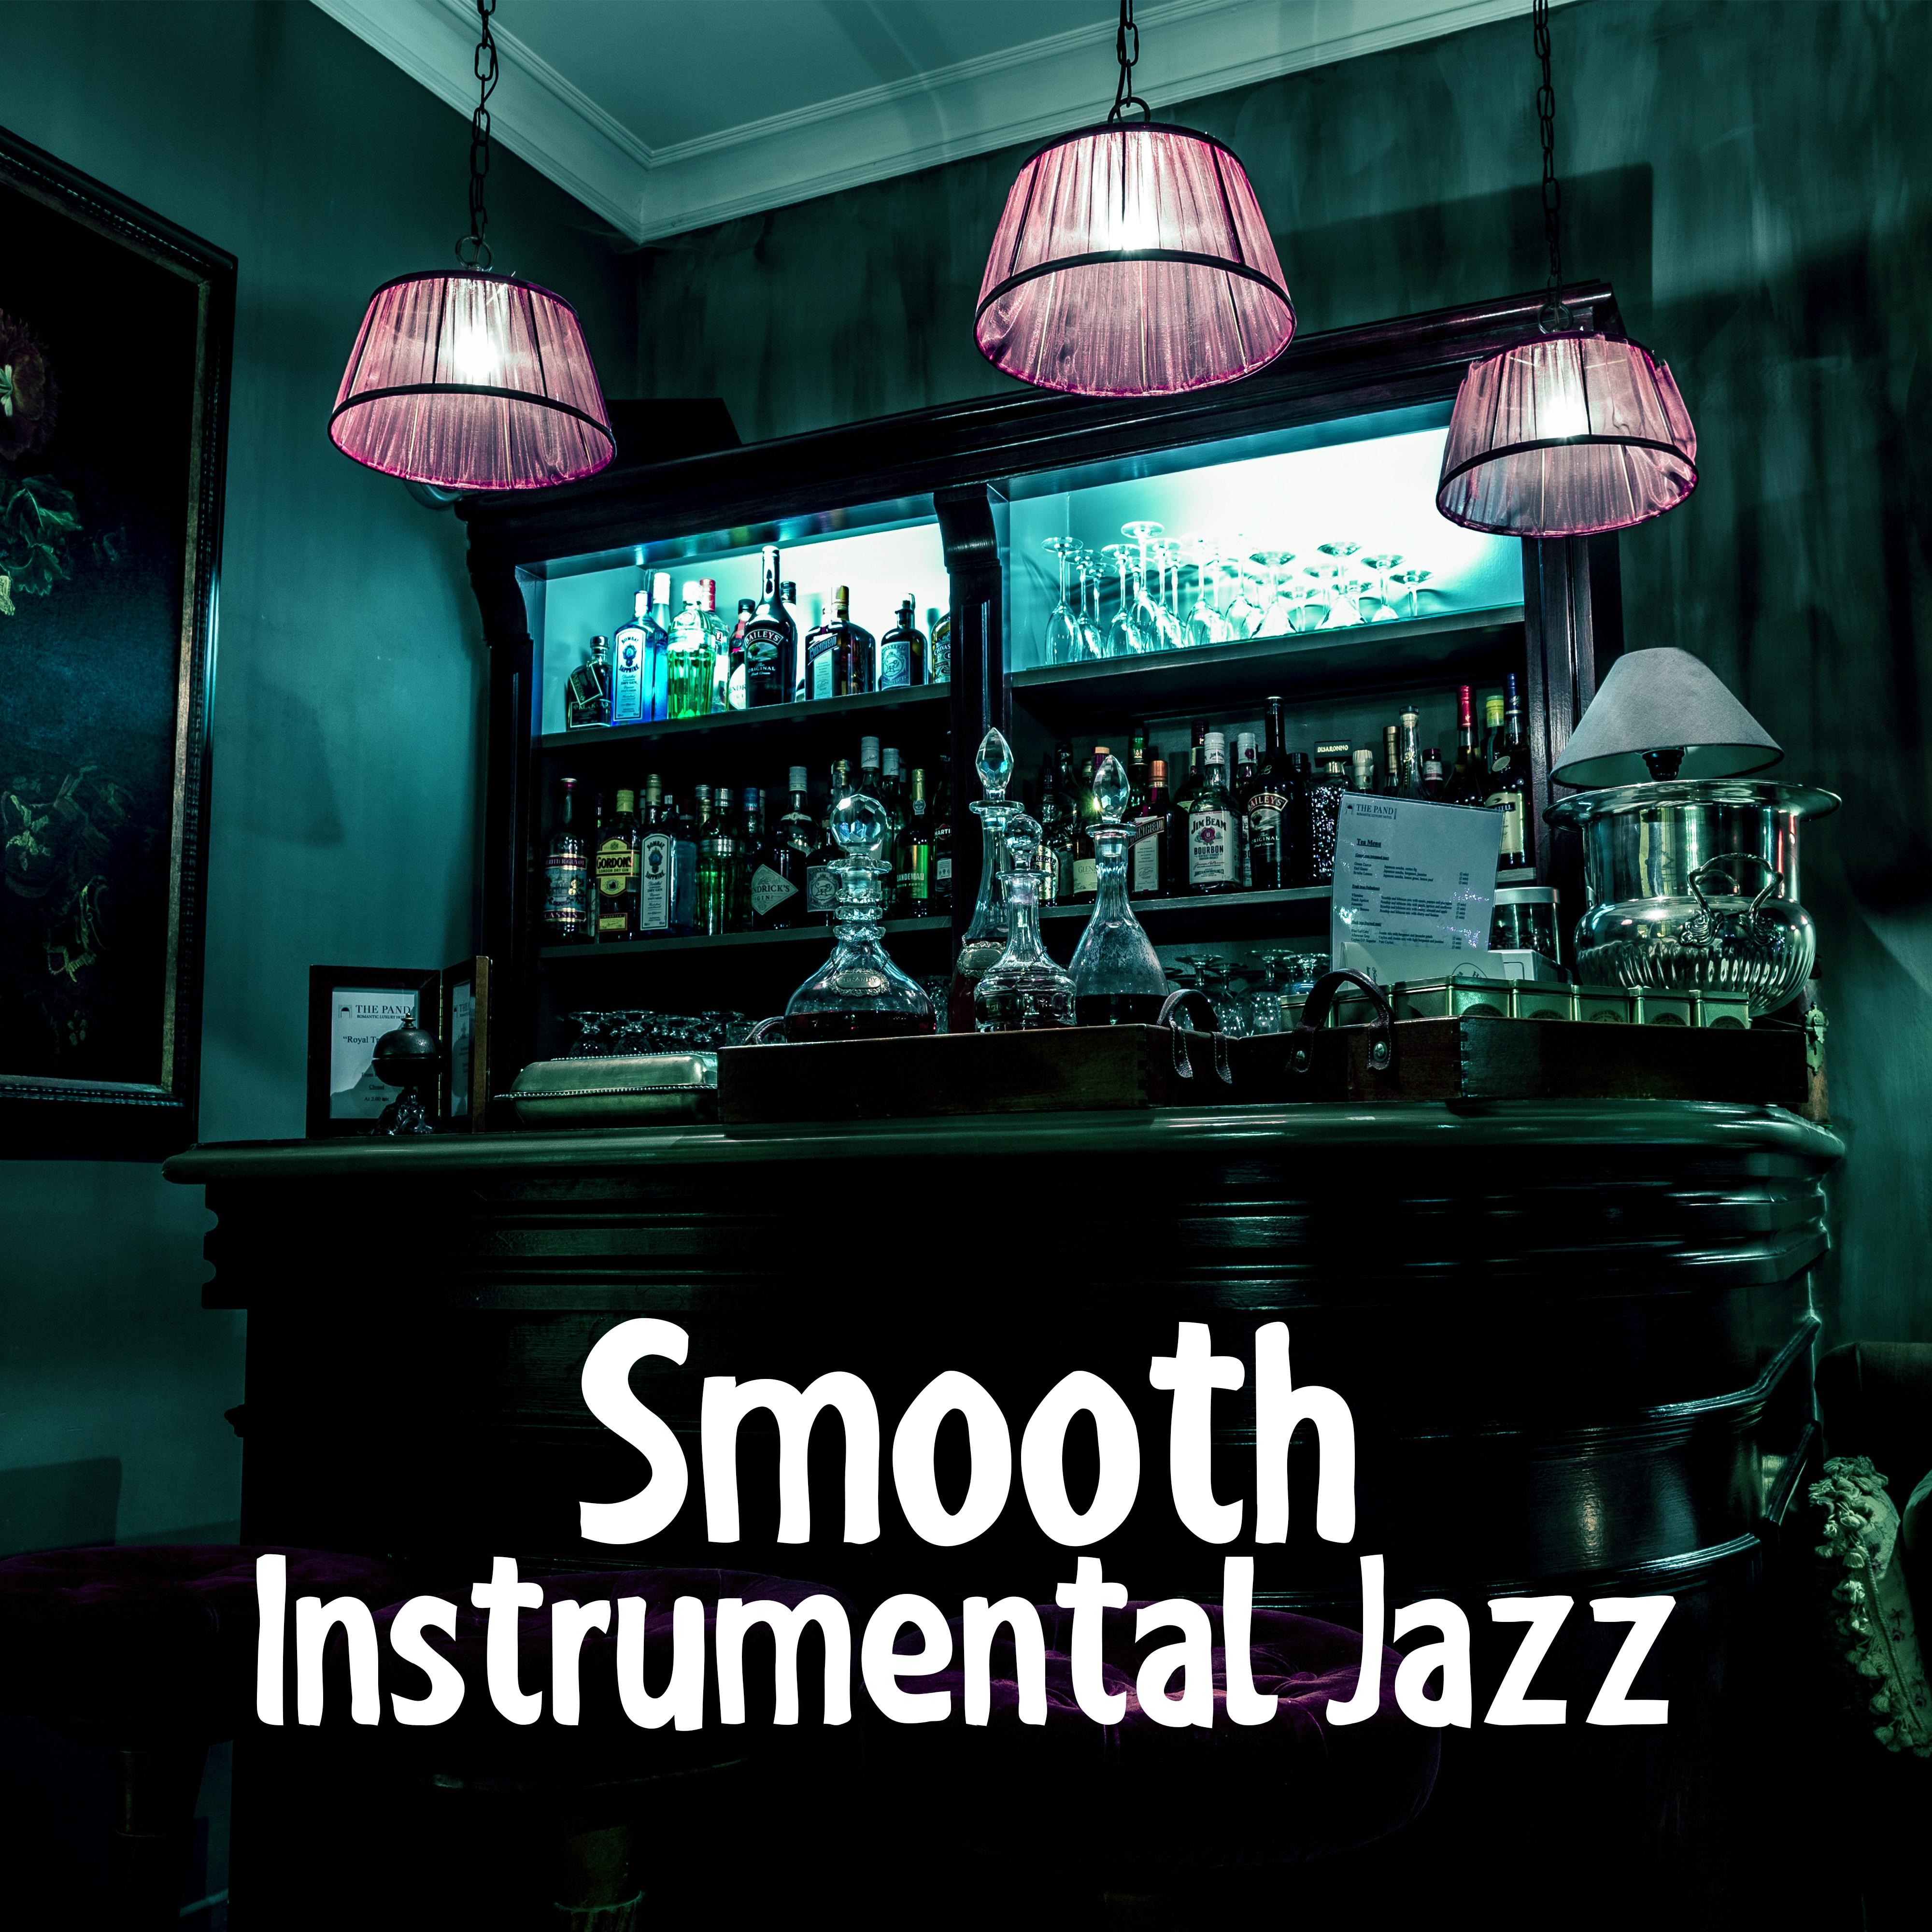 Smooth Instrumental Jazz  Calming Jazz Sounds, Music to Rest, Jazz Relaxation, Late Night Music